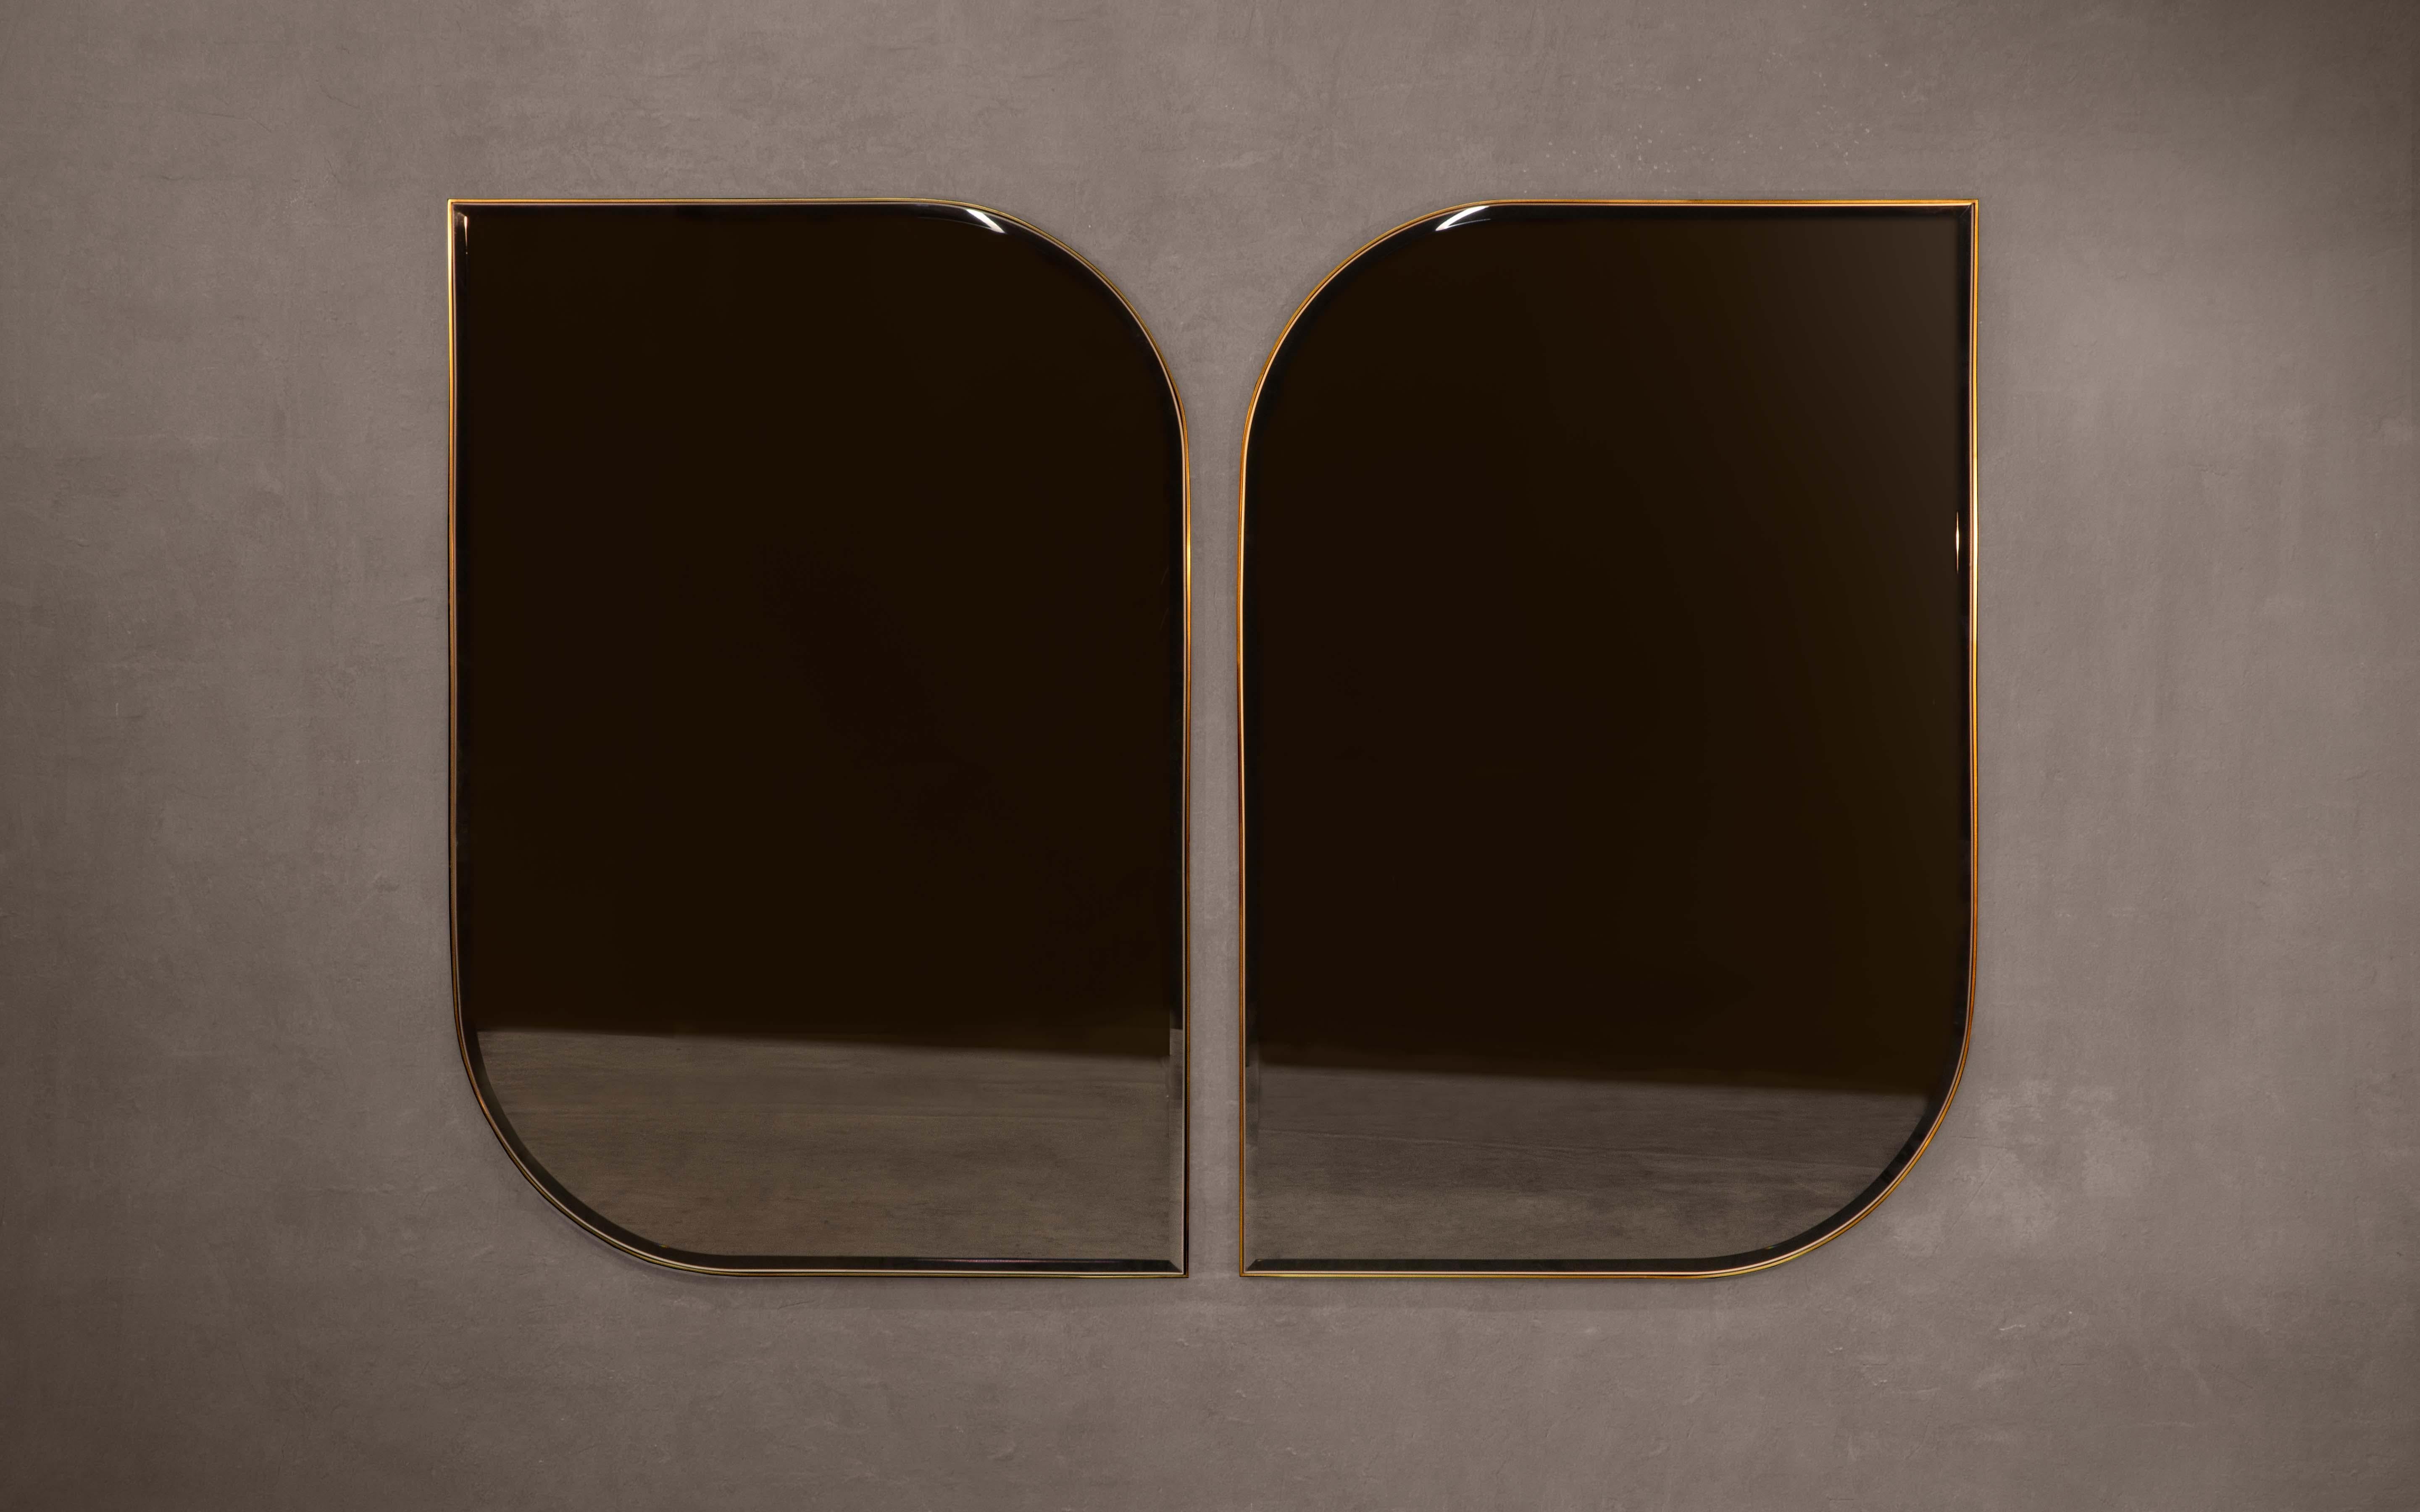 Set of 2 armstrong large mirrors by Novocastrian
Dimensions: W 2 x D 96 x H 144 cm
Materials: Polished brass, mirror

Also available in, Small, Medium sizes and different finishes.

